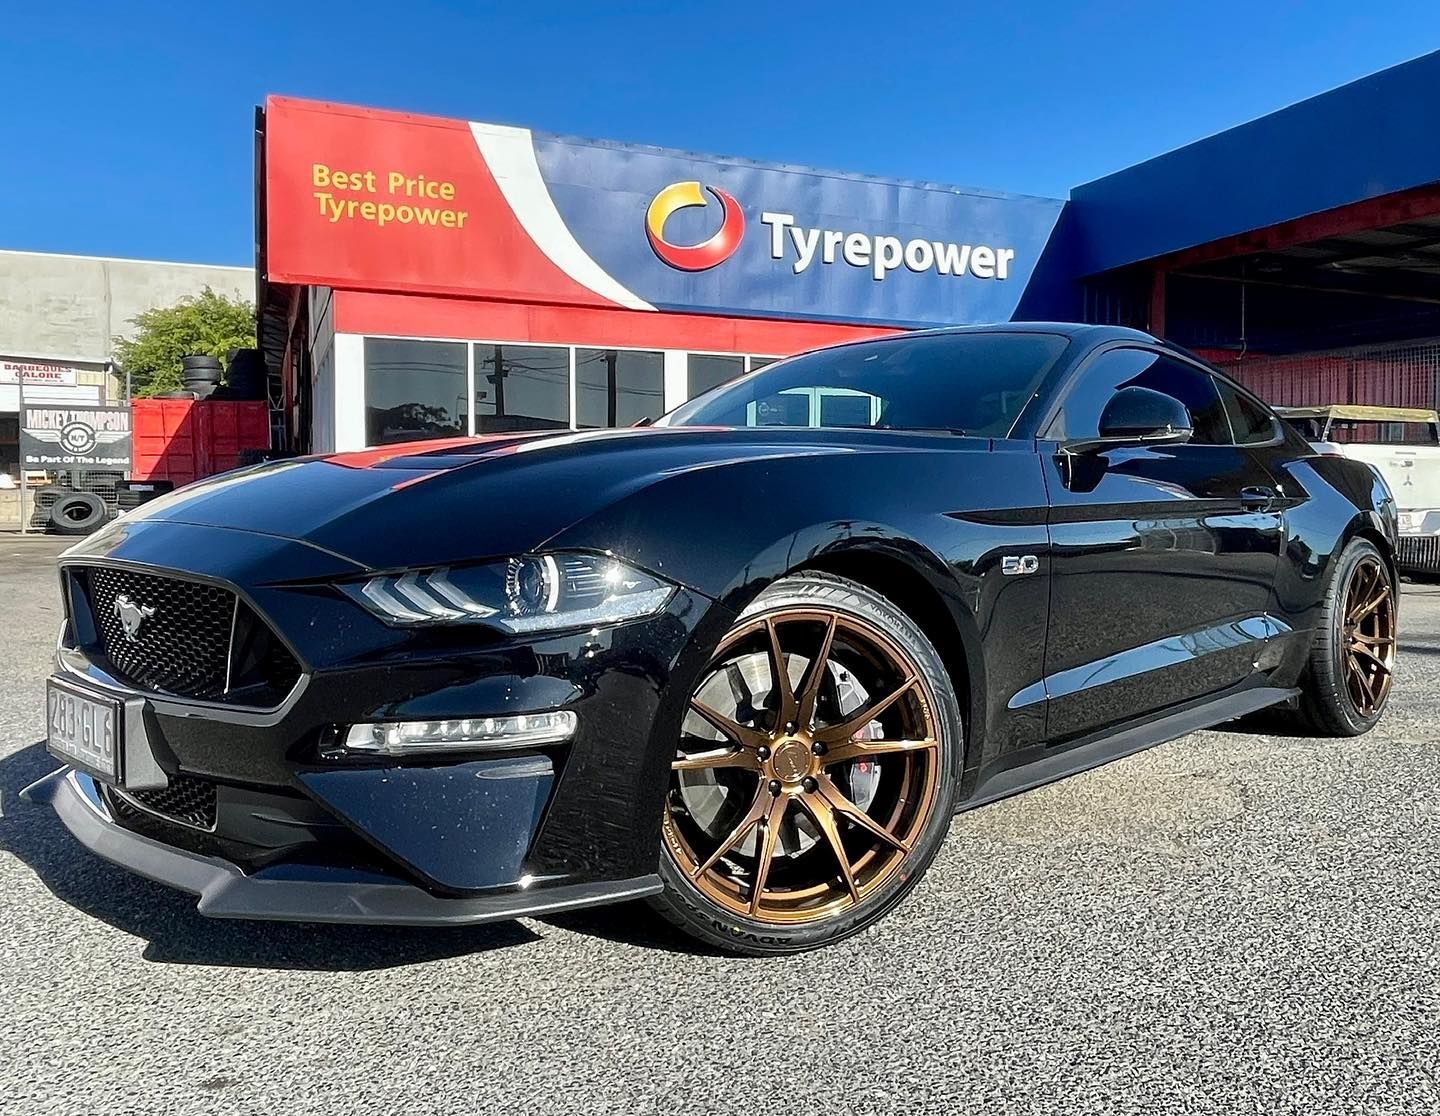 Ford Mustang S550 with 19-inch Koya SF06